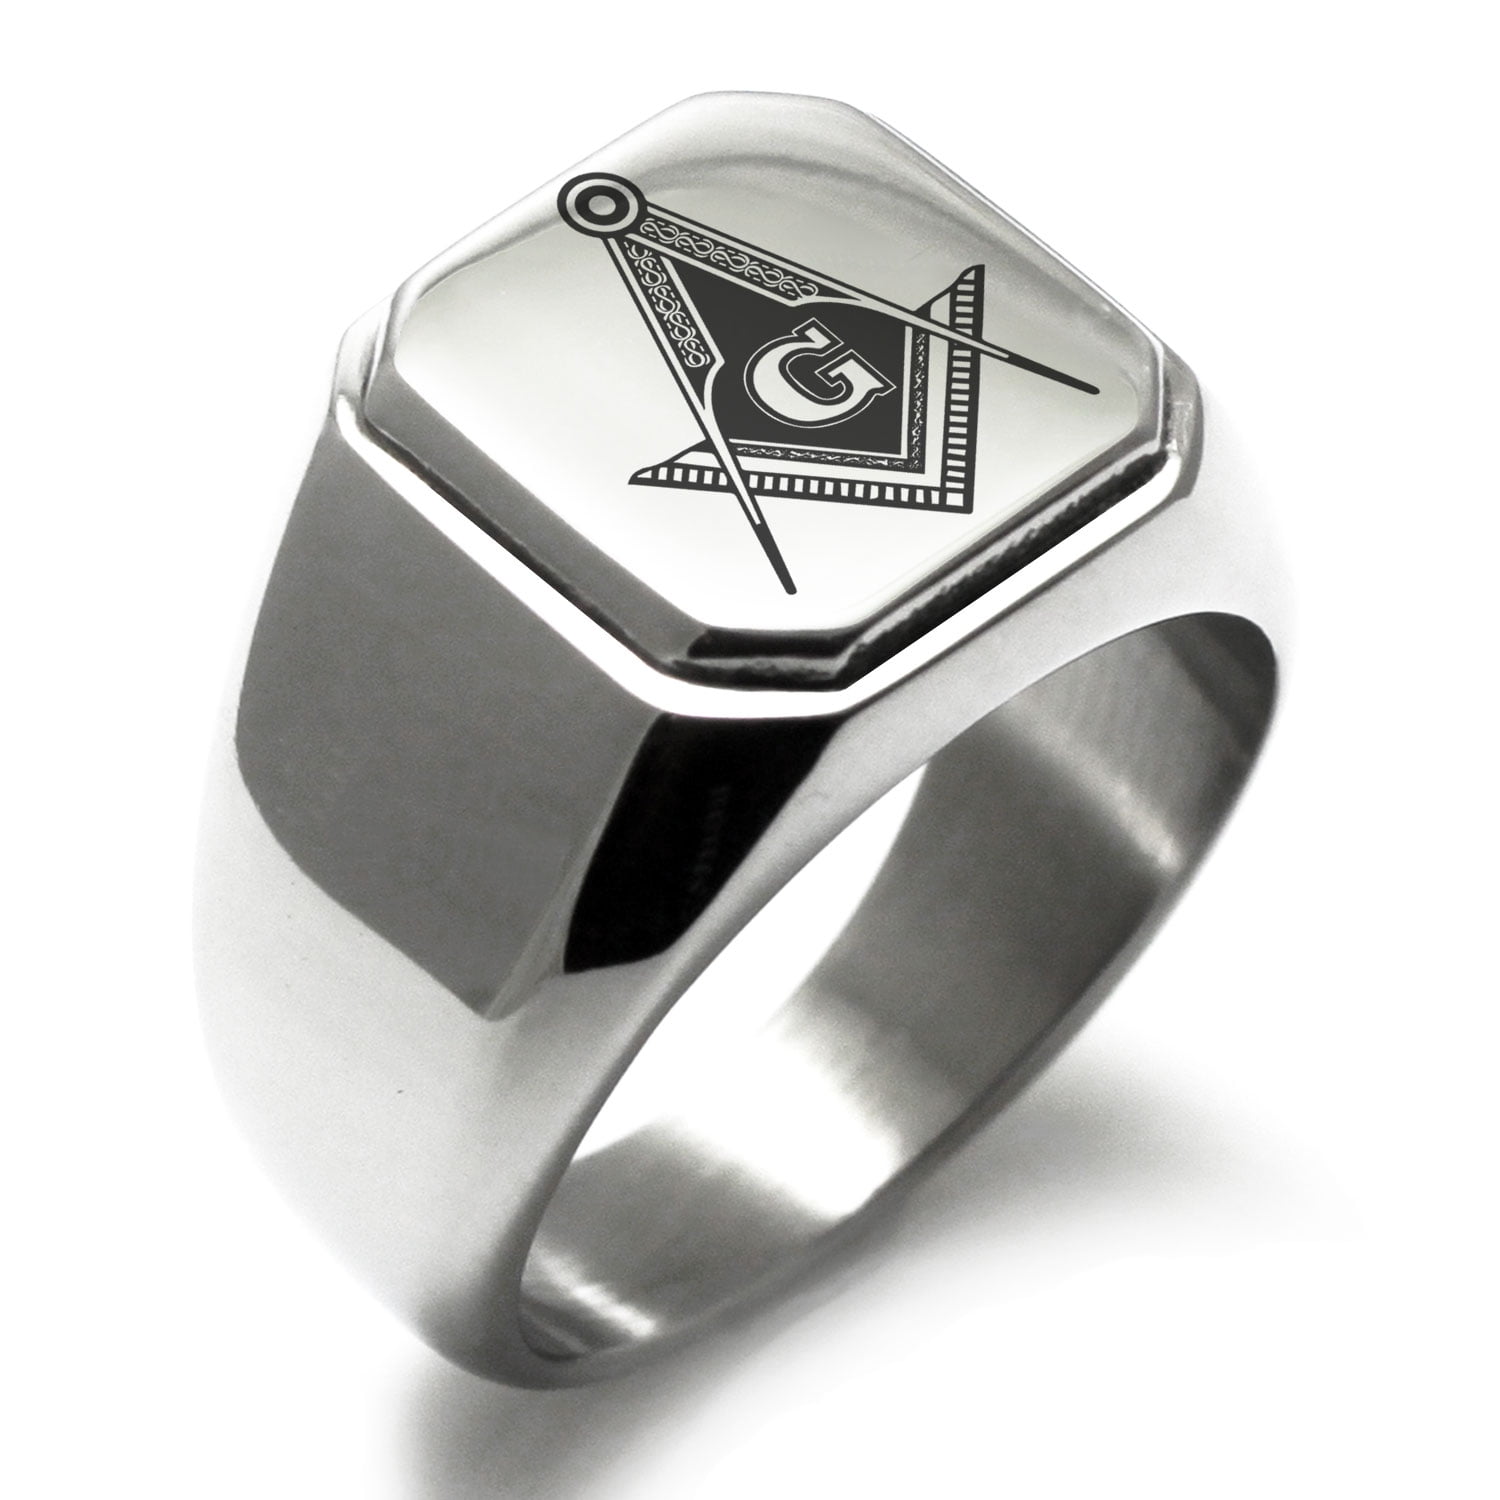 IP Gold And Burnish Steel 2-Tone Square Face Masonic Stainless Steel Ring M4659 